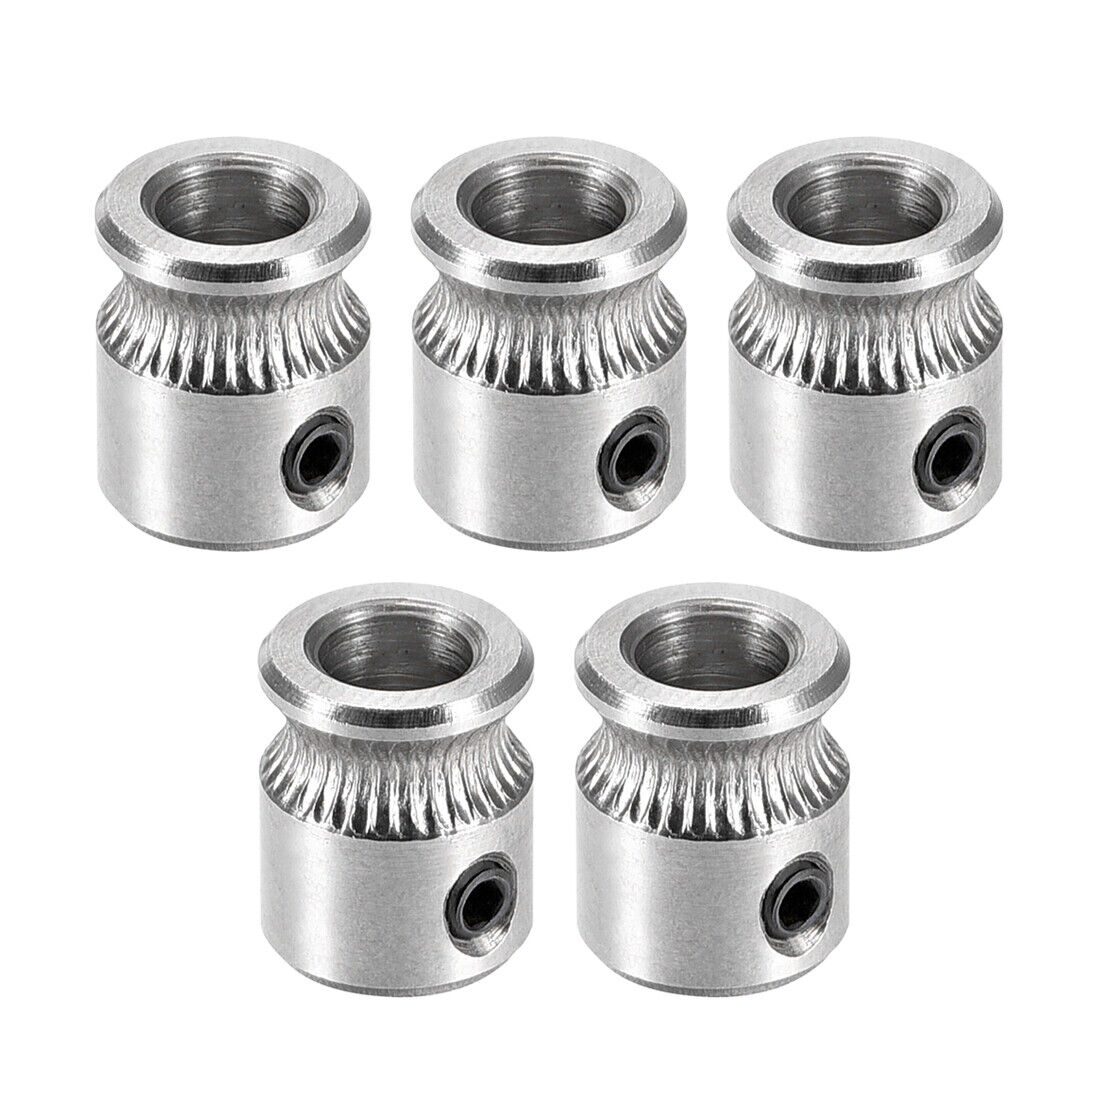 MK8 Drive Gear Direct Extruder Drive 5mm Bore for Extruder 5pcs